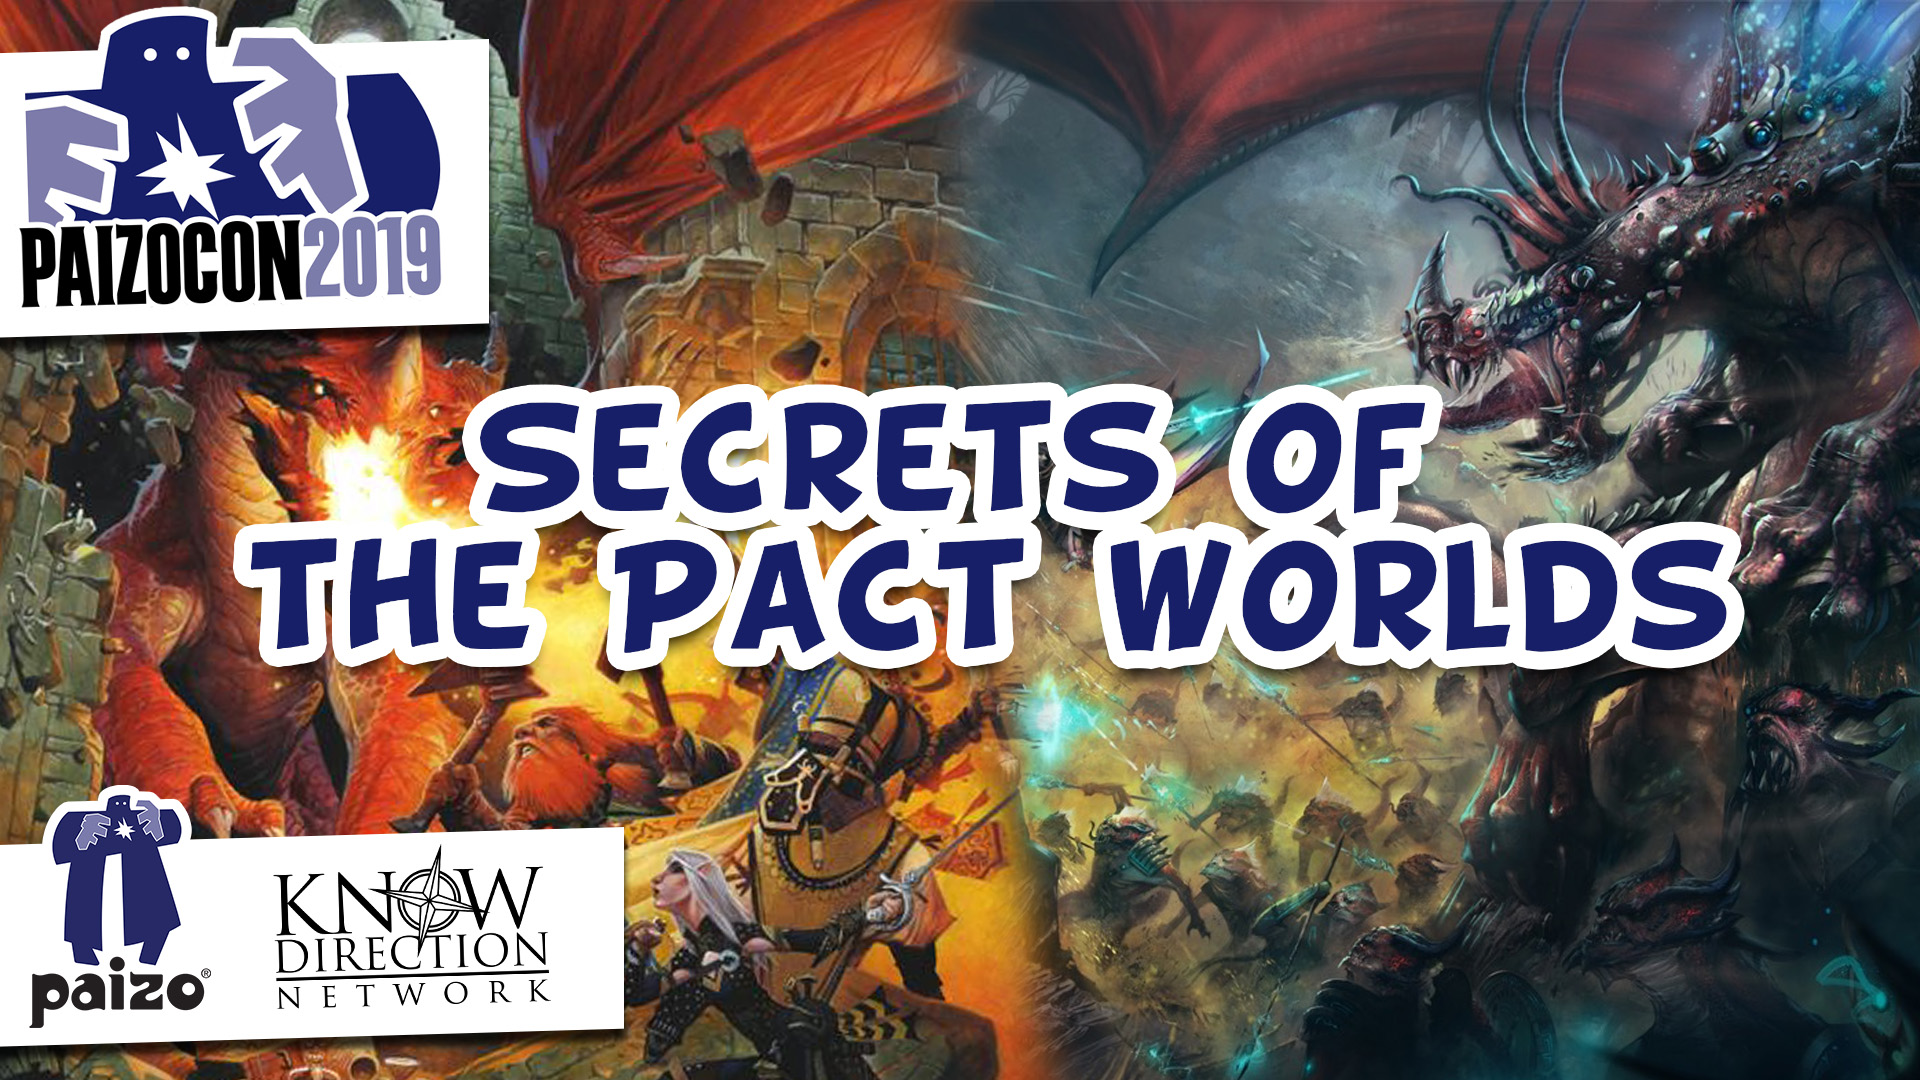 Secrets of the Pact Worlds